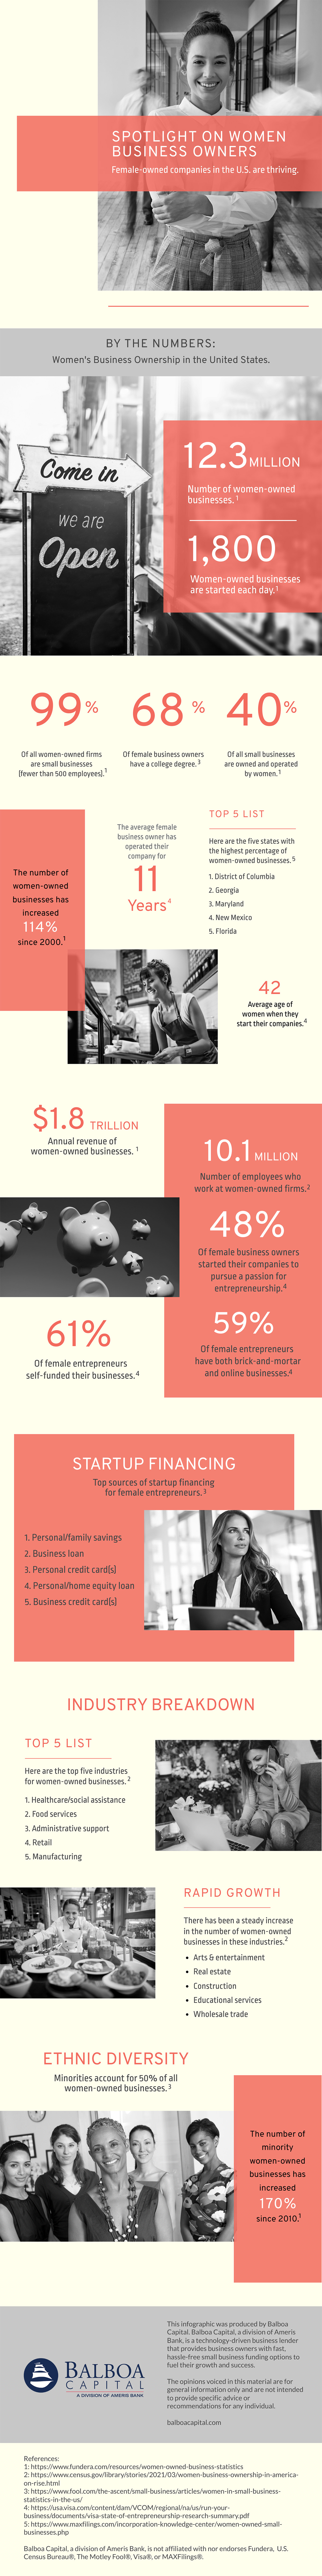 Women Business Owners Infographic